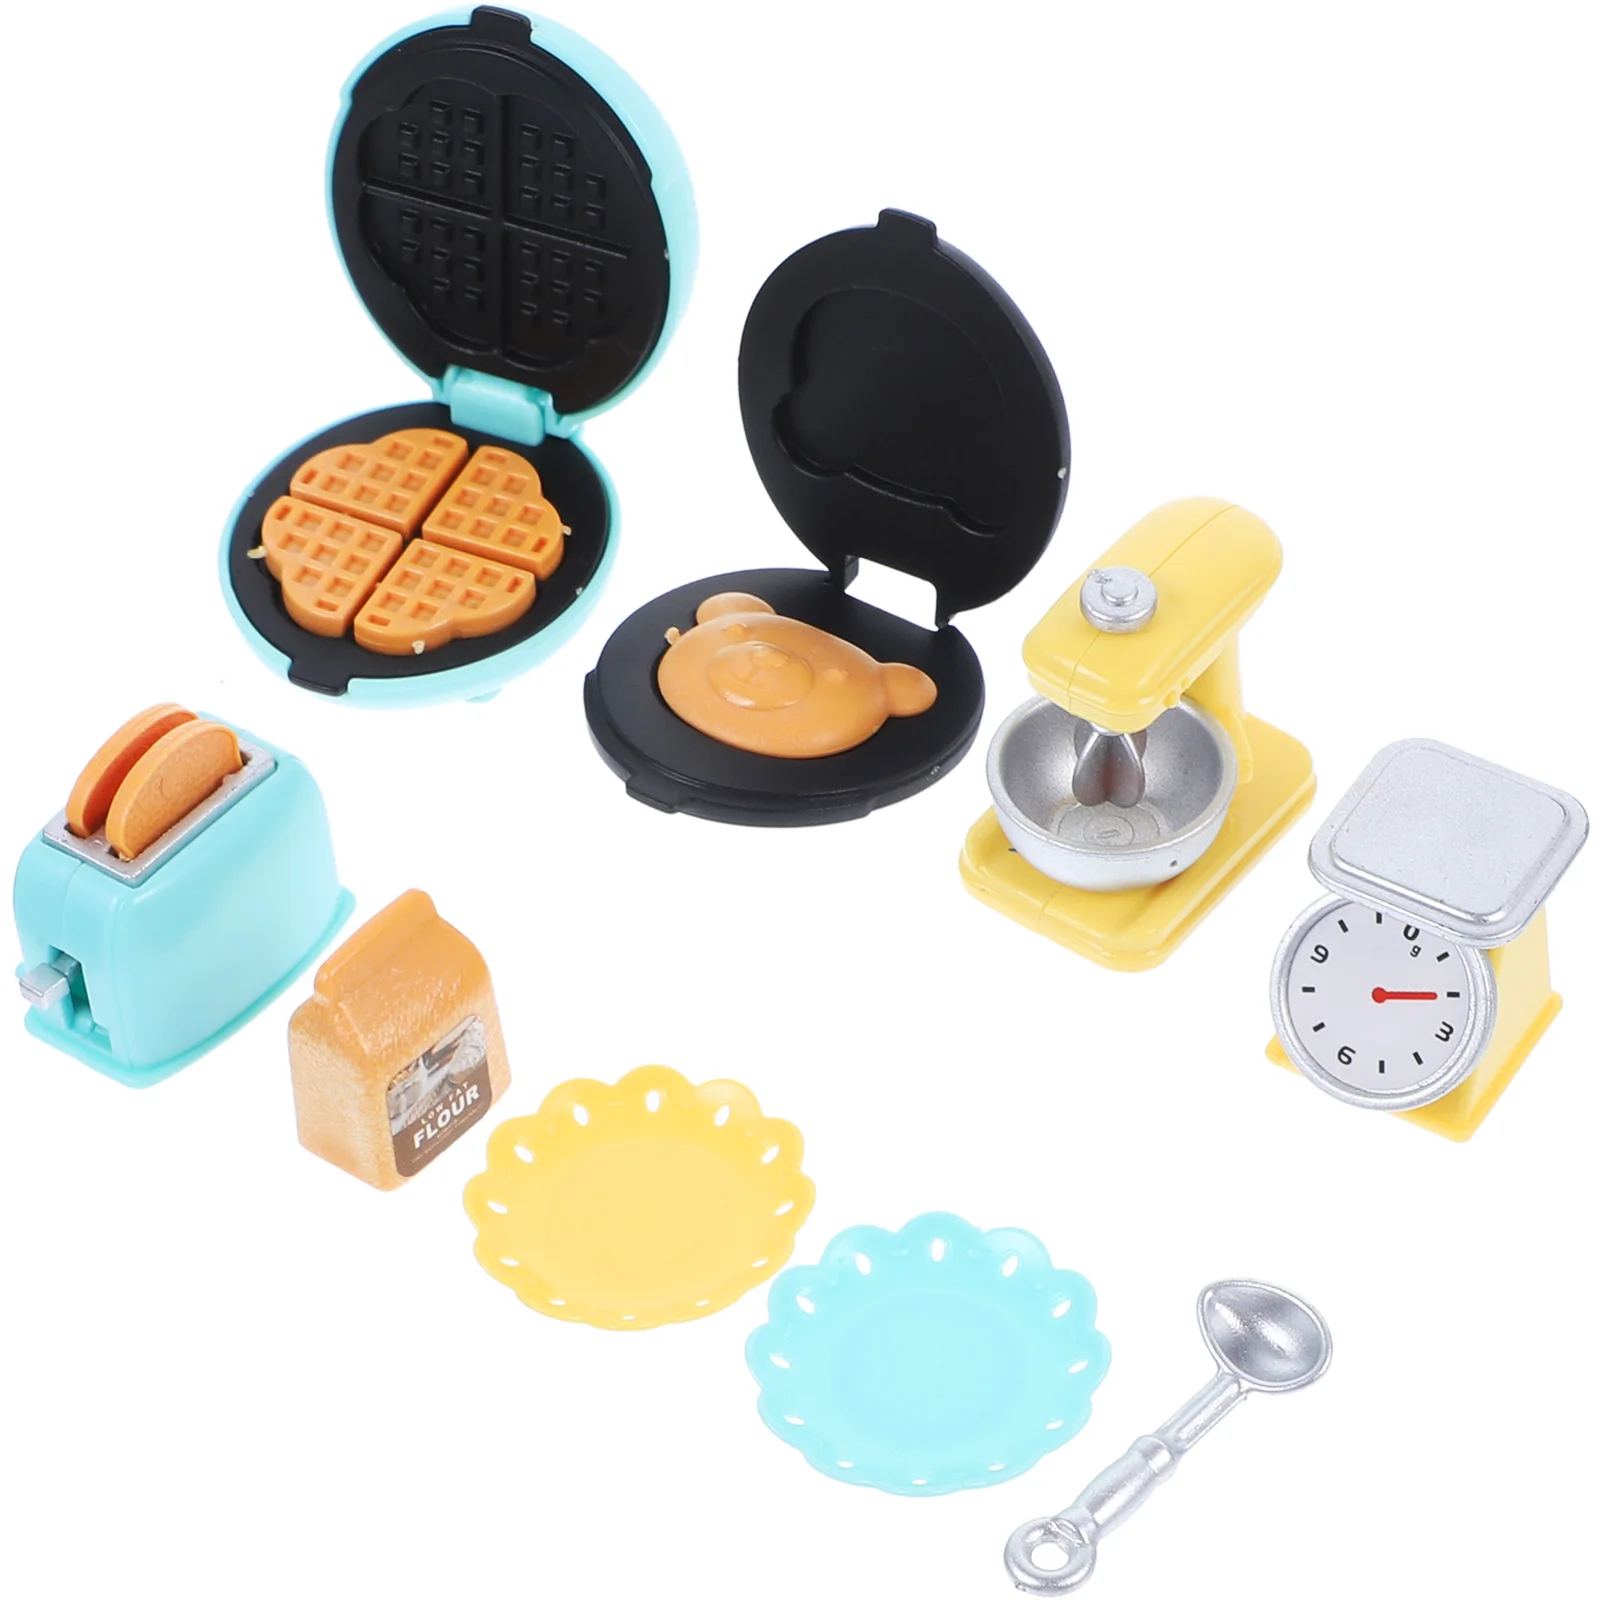 

Dollhouse Cooker Mini Model Toy Accessories Miniature Kit Children Home Accessory Decor Simulated Kitchenware Bakery Toys Kids